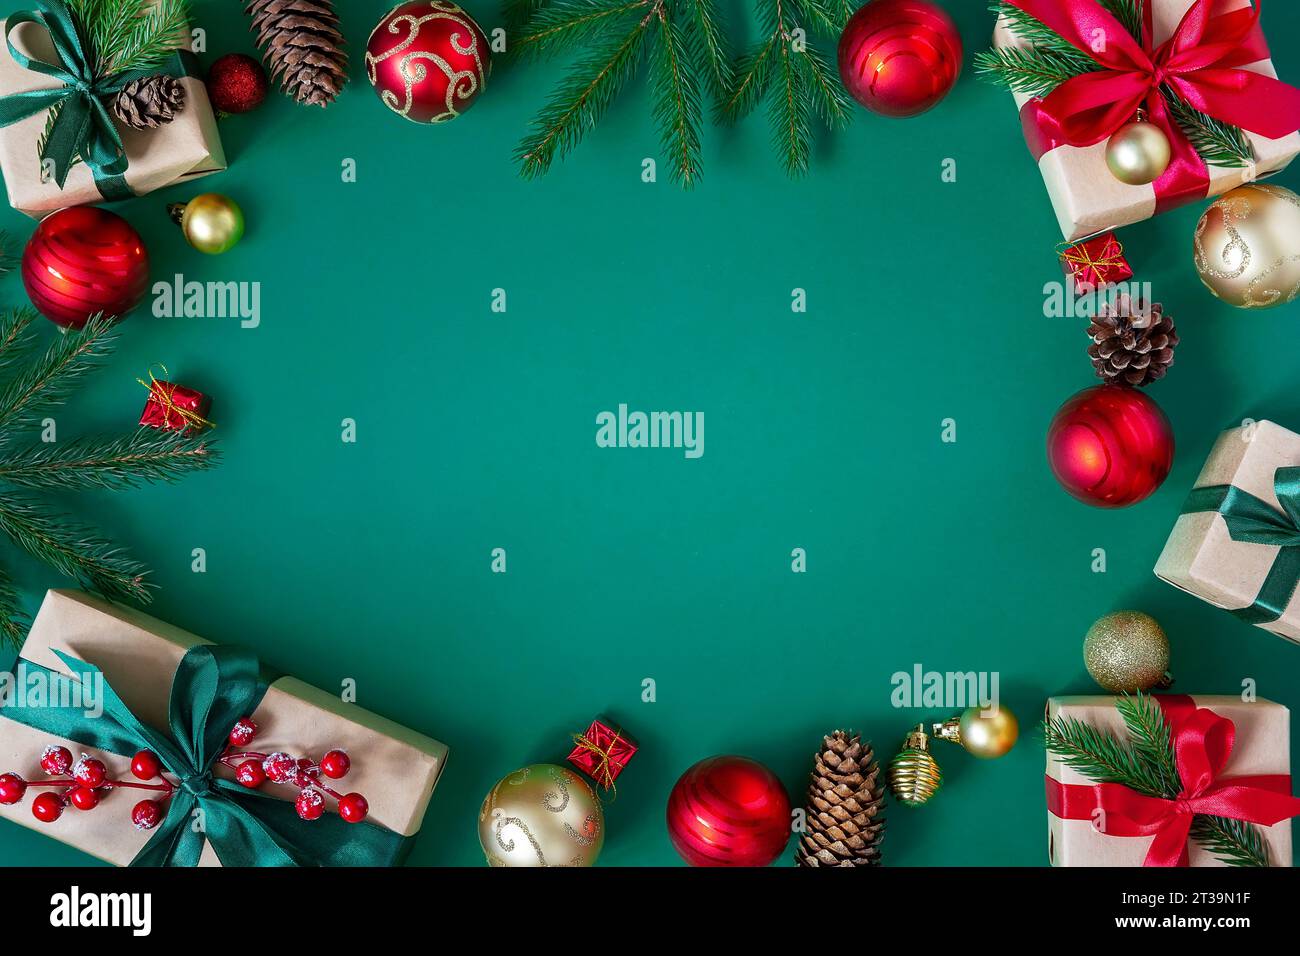 Holiday green background with gift boxes tied with silk ribbons and Christmas decorations. Christmas holiday background. Top view with copy space. Stock Photo